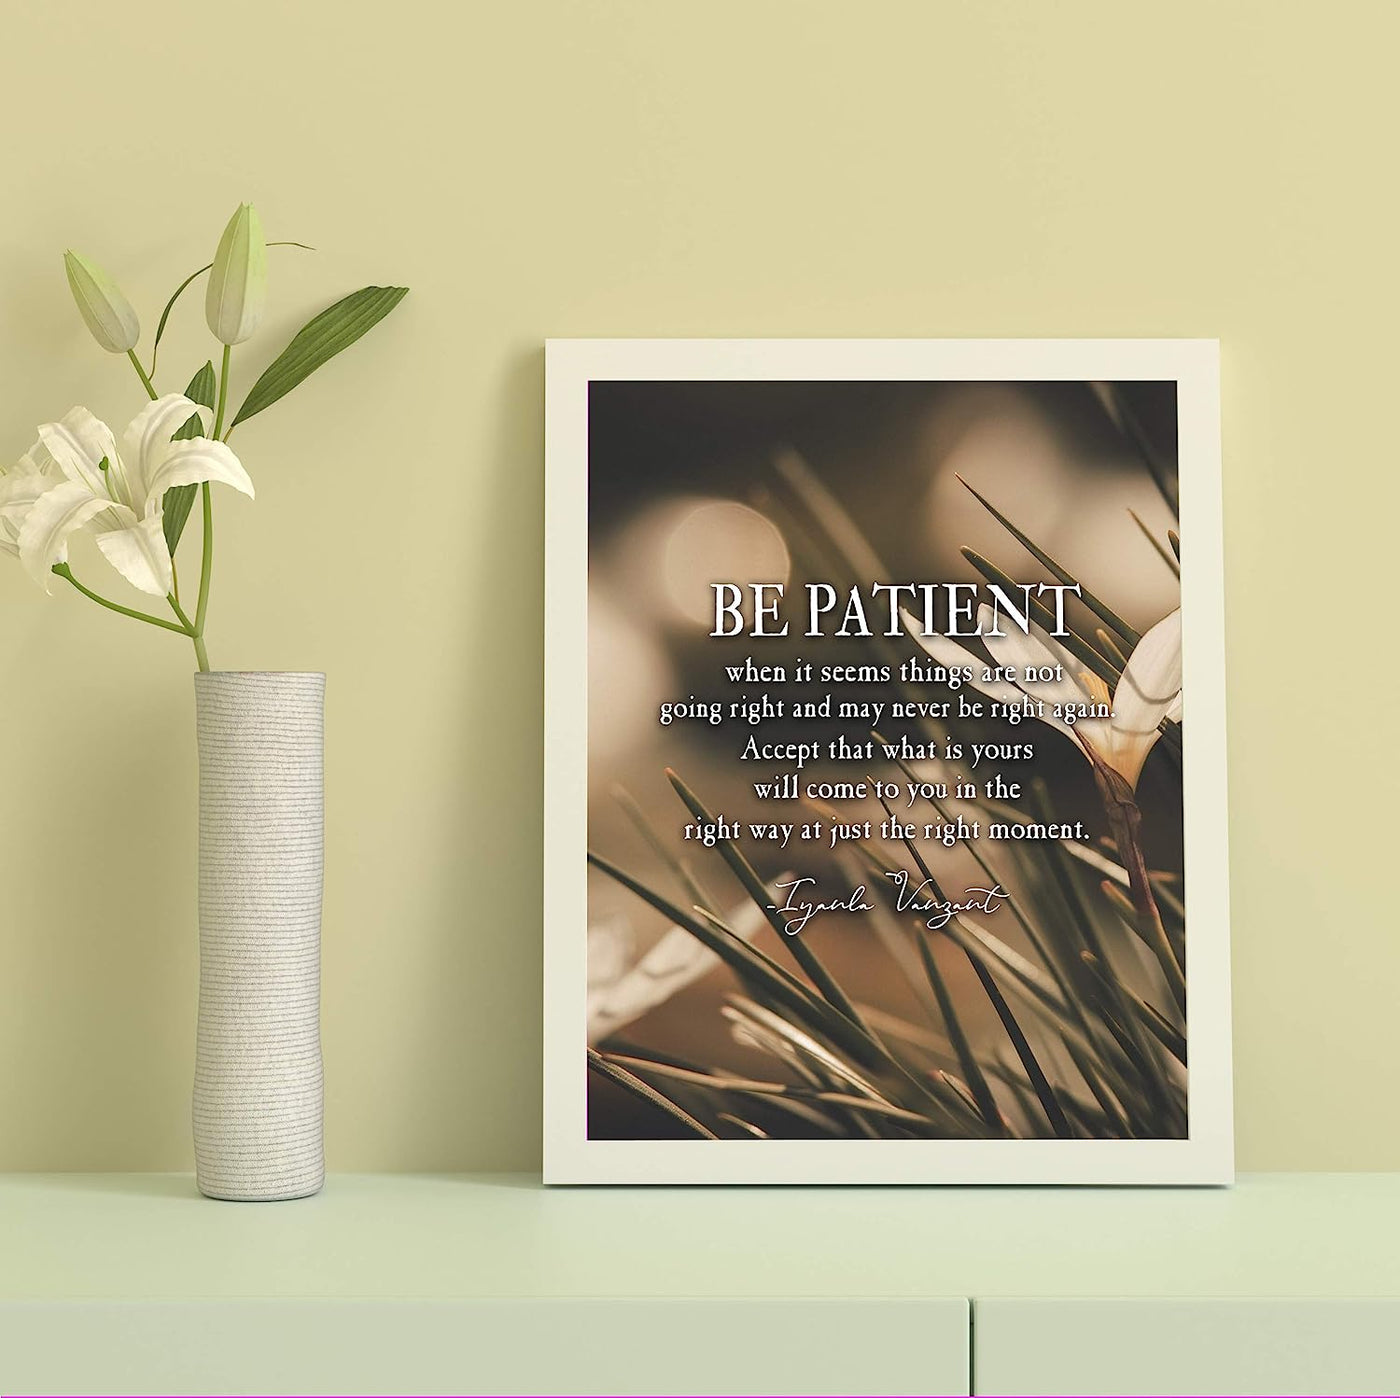 ?Be Patient-Accept What Is Yours?- Iyanla Vanzant Quotes Wall Art -8 x 10" Typographic Poster Print-Ready to Frame. Inspirational Home-Studio-Office-School Decor. Great Life Lesson on Patience!